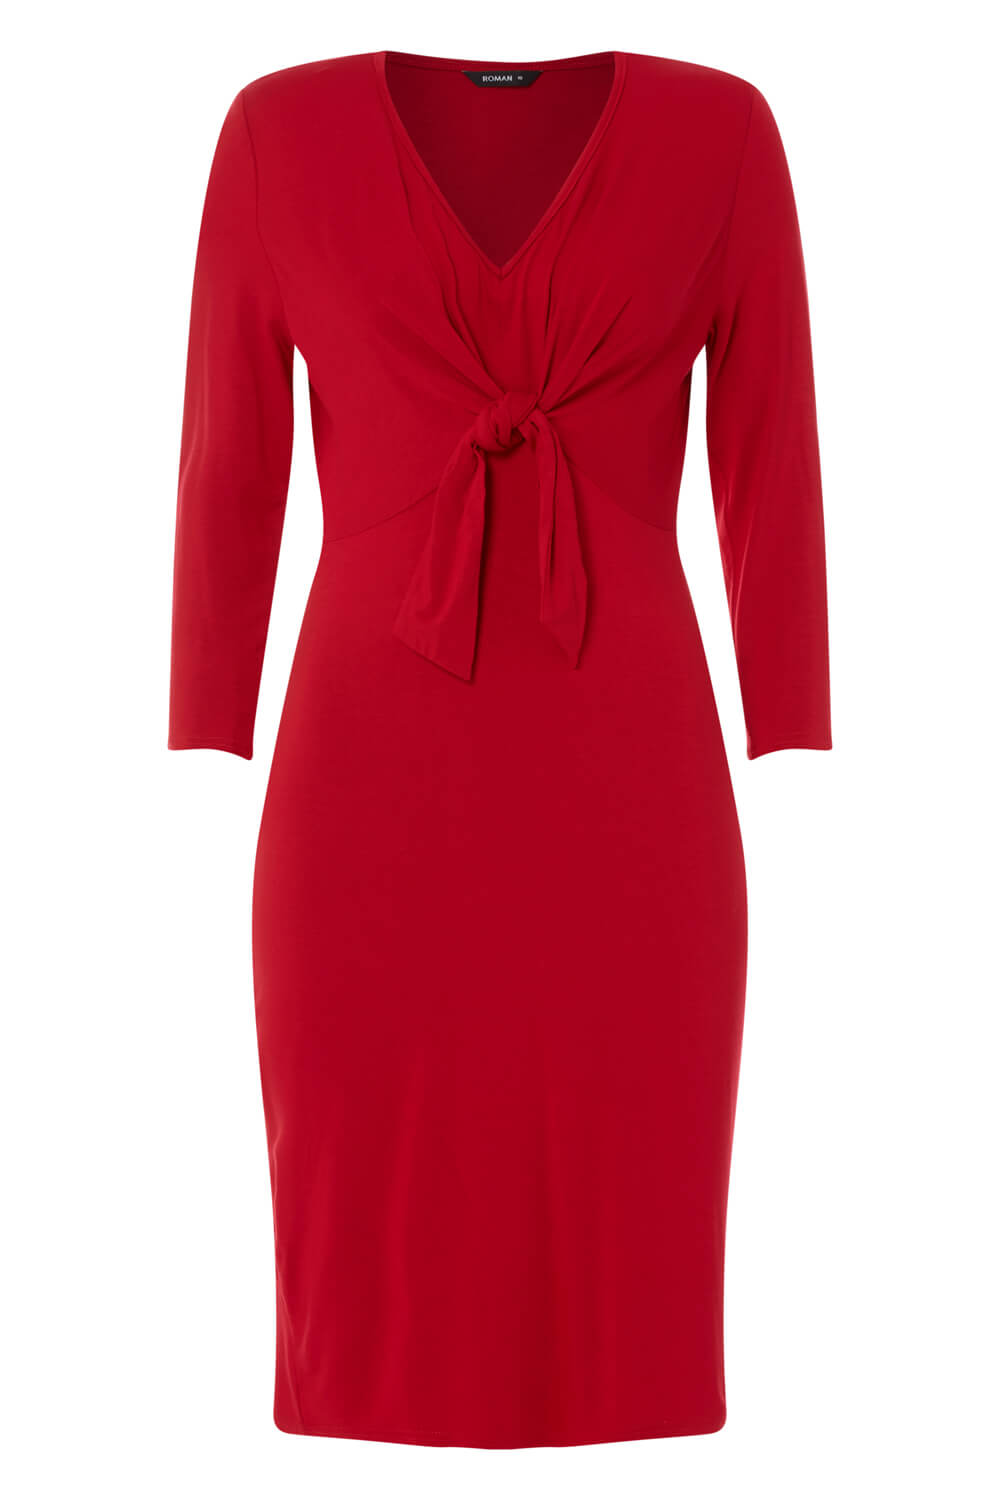 Red Tie Front Fitted Dress, Image 4 of 4